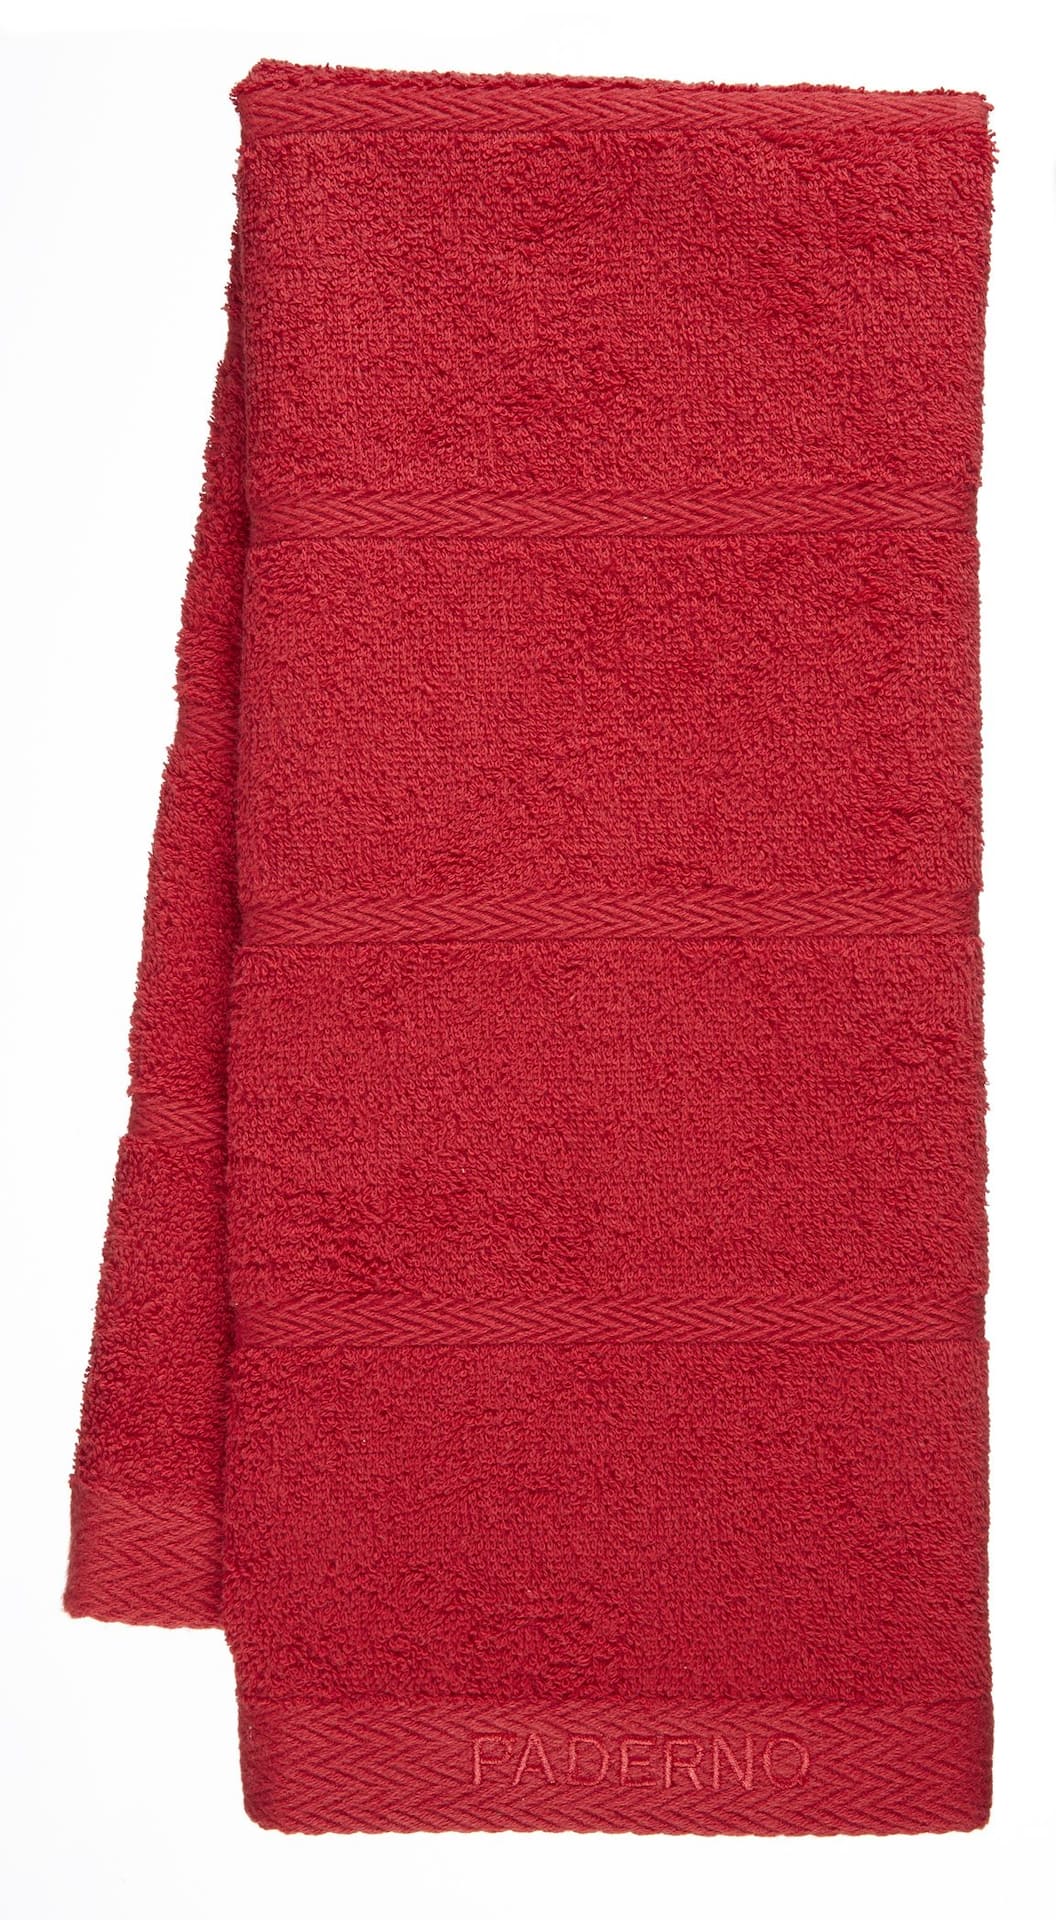 Bulk Terry Cotton Bar Towels, 10 Pound Package